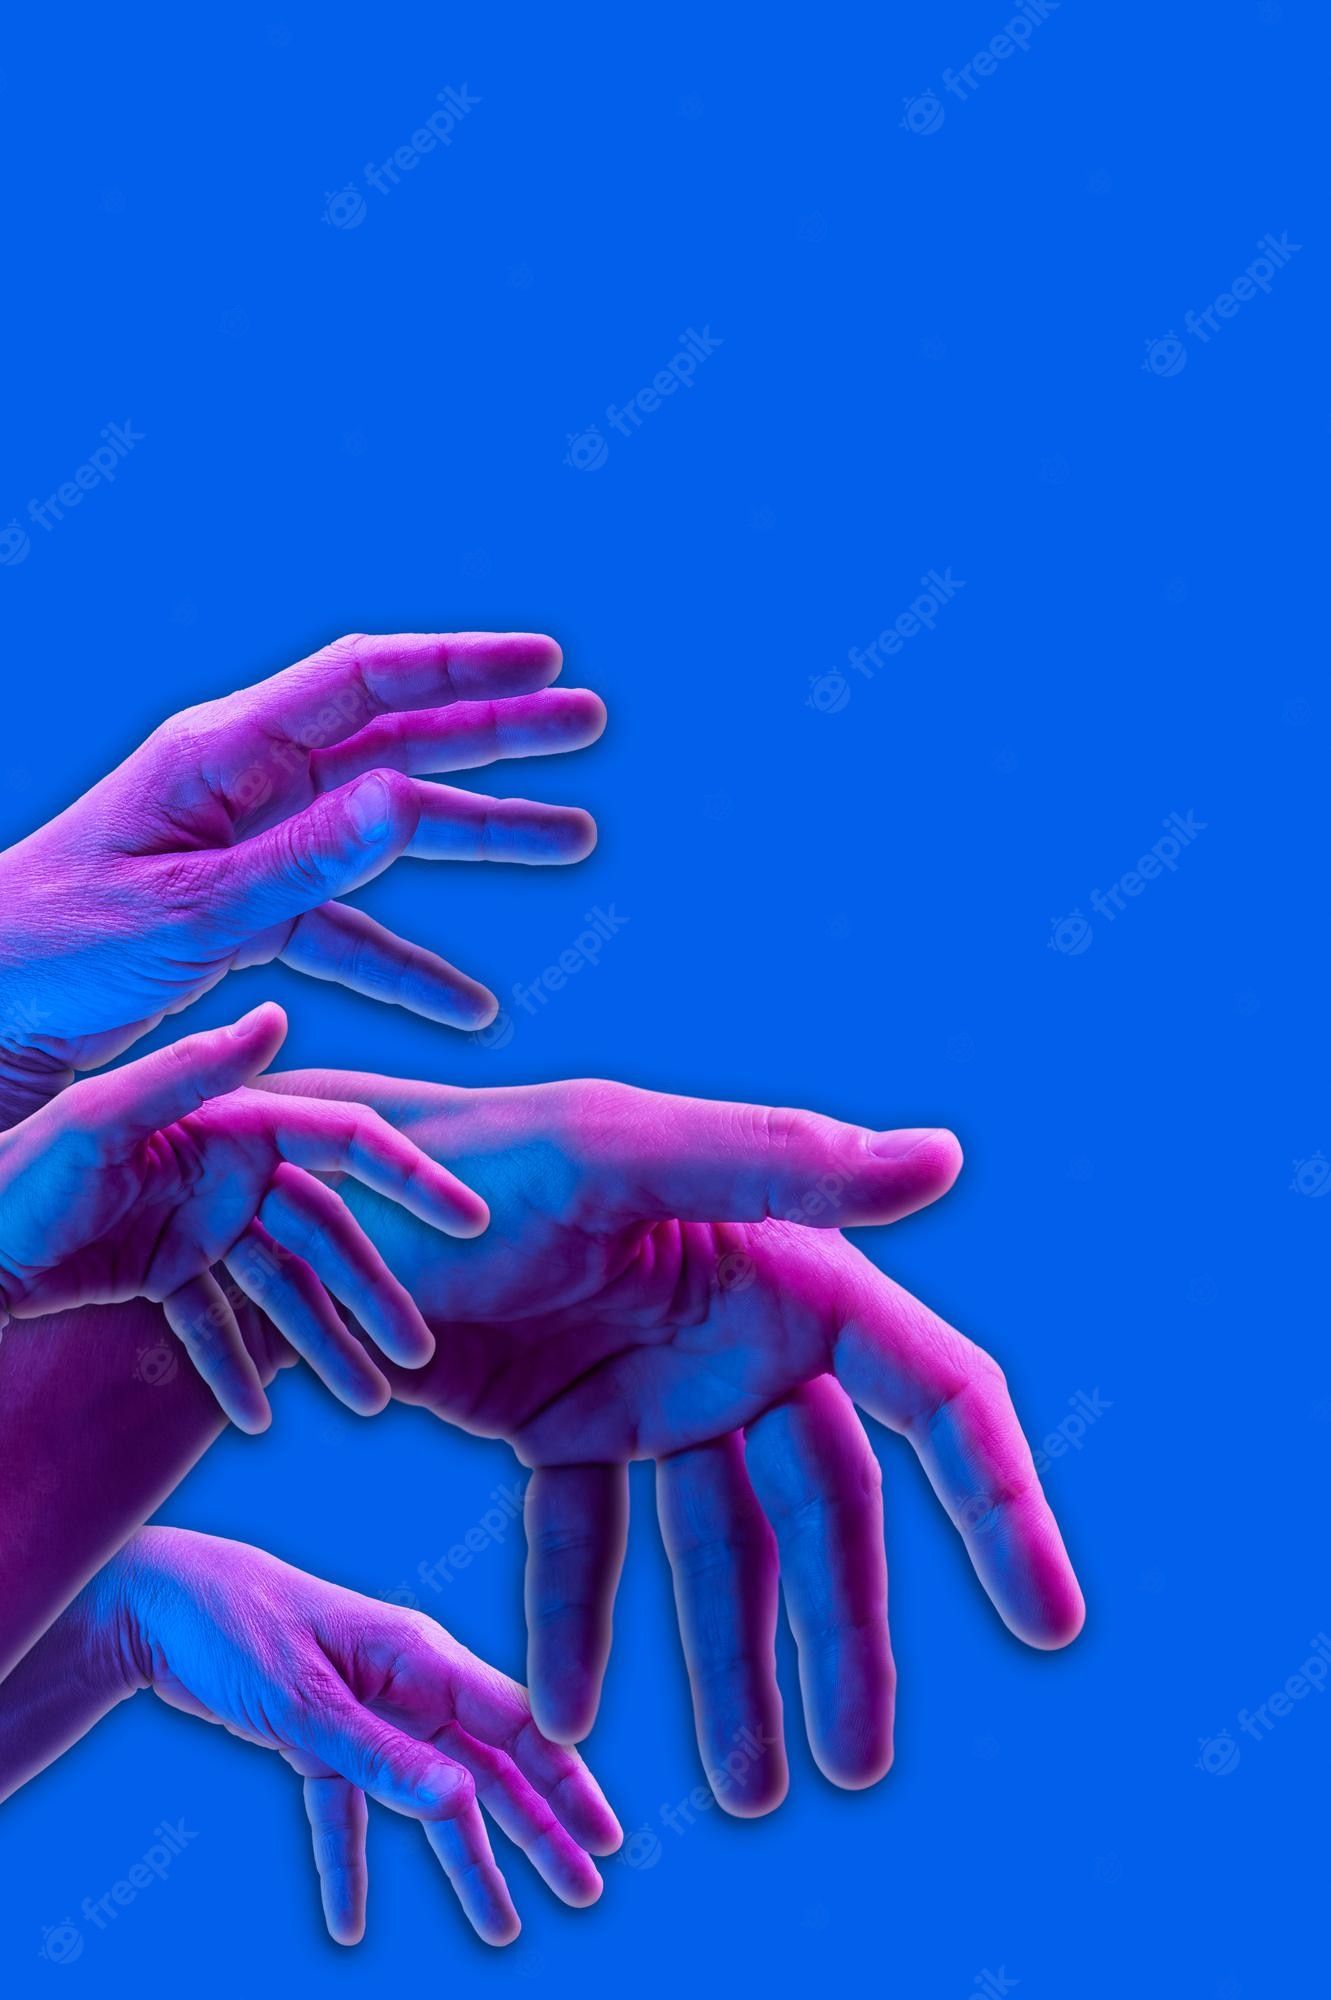 Premium Photo. Hands in a surreal style in violet blue neon colors. modern psychedelic creative element with human palm for posters, banners, wallpaper. copy space for text. magazine style. pop